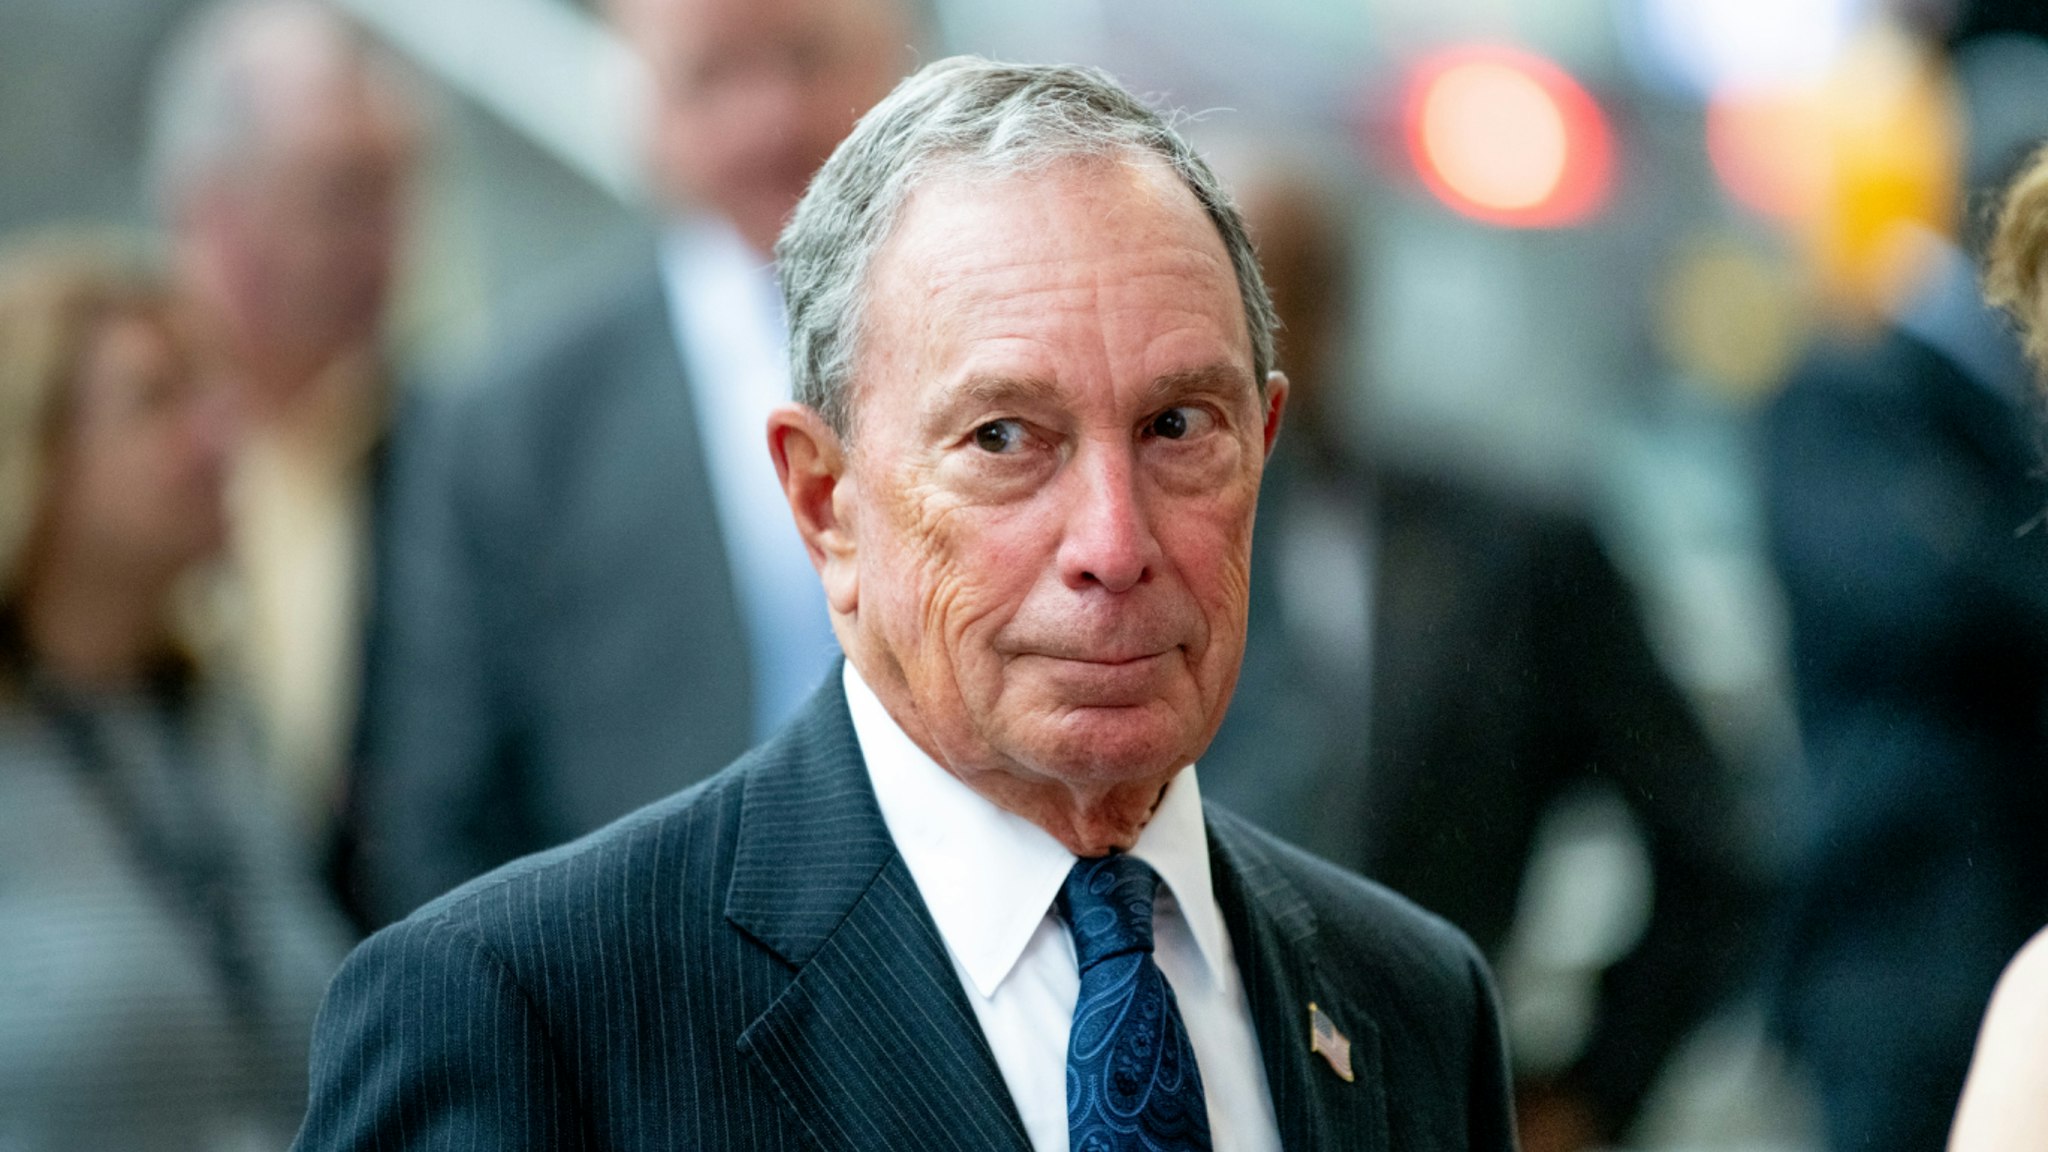 Michael Bloomberg attends the 2019 American Songbook Gala at Alice Tully Hall at Lincoln Center on June 19, 2019 in New York City.